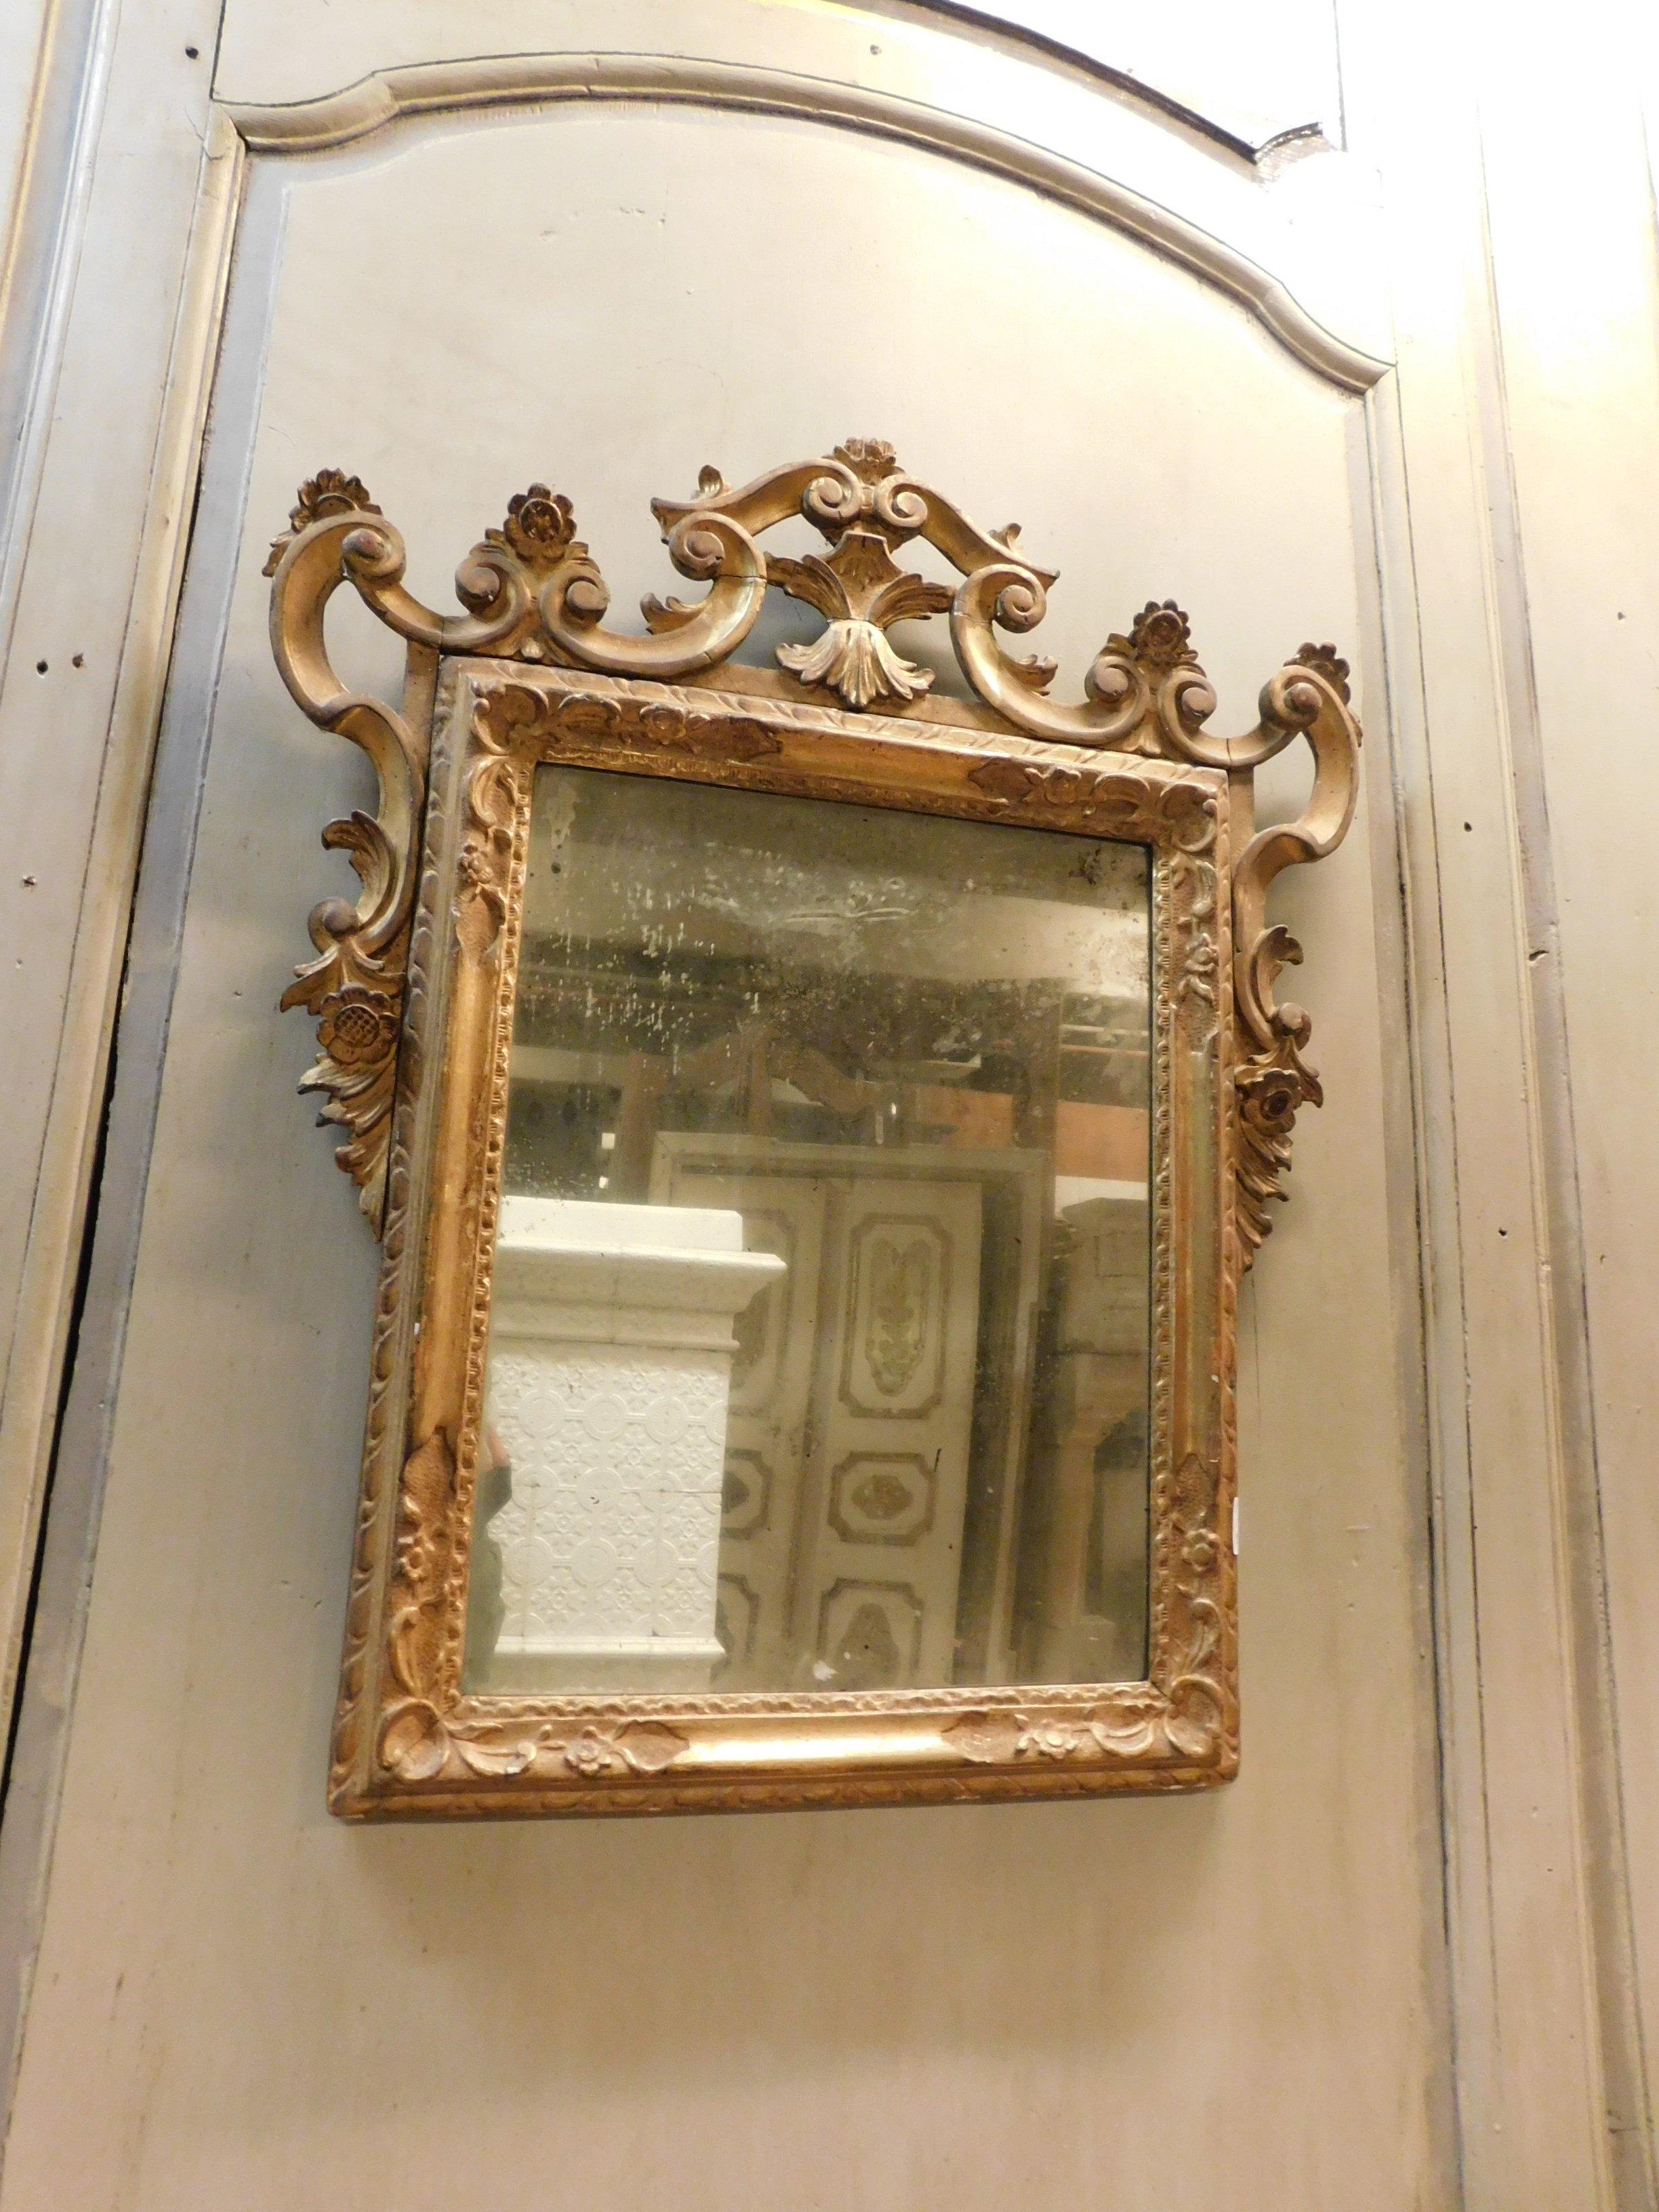 Antique gilded mirror with sculptures carved in wood, coping rich in decorations and rectangular frame with a beautiful appearance, built and carved by hand in the 18th century, from Piedmont (Northern Italy, size cm W 77 x H 90, ideal in luxury